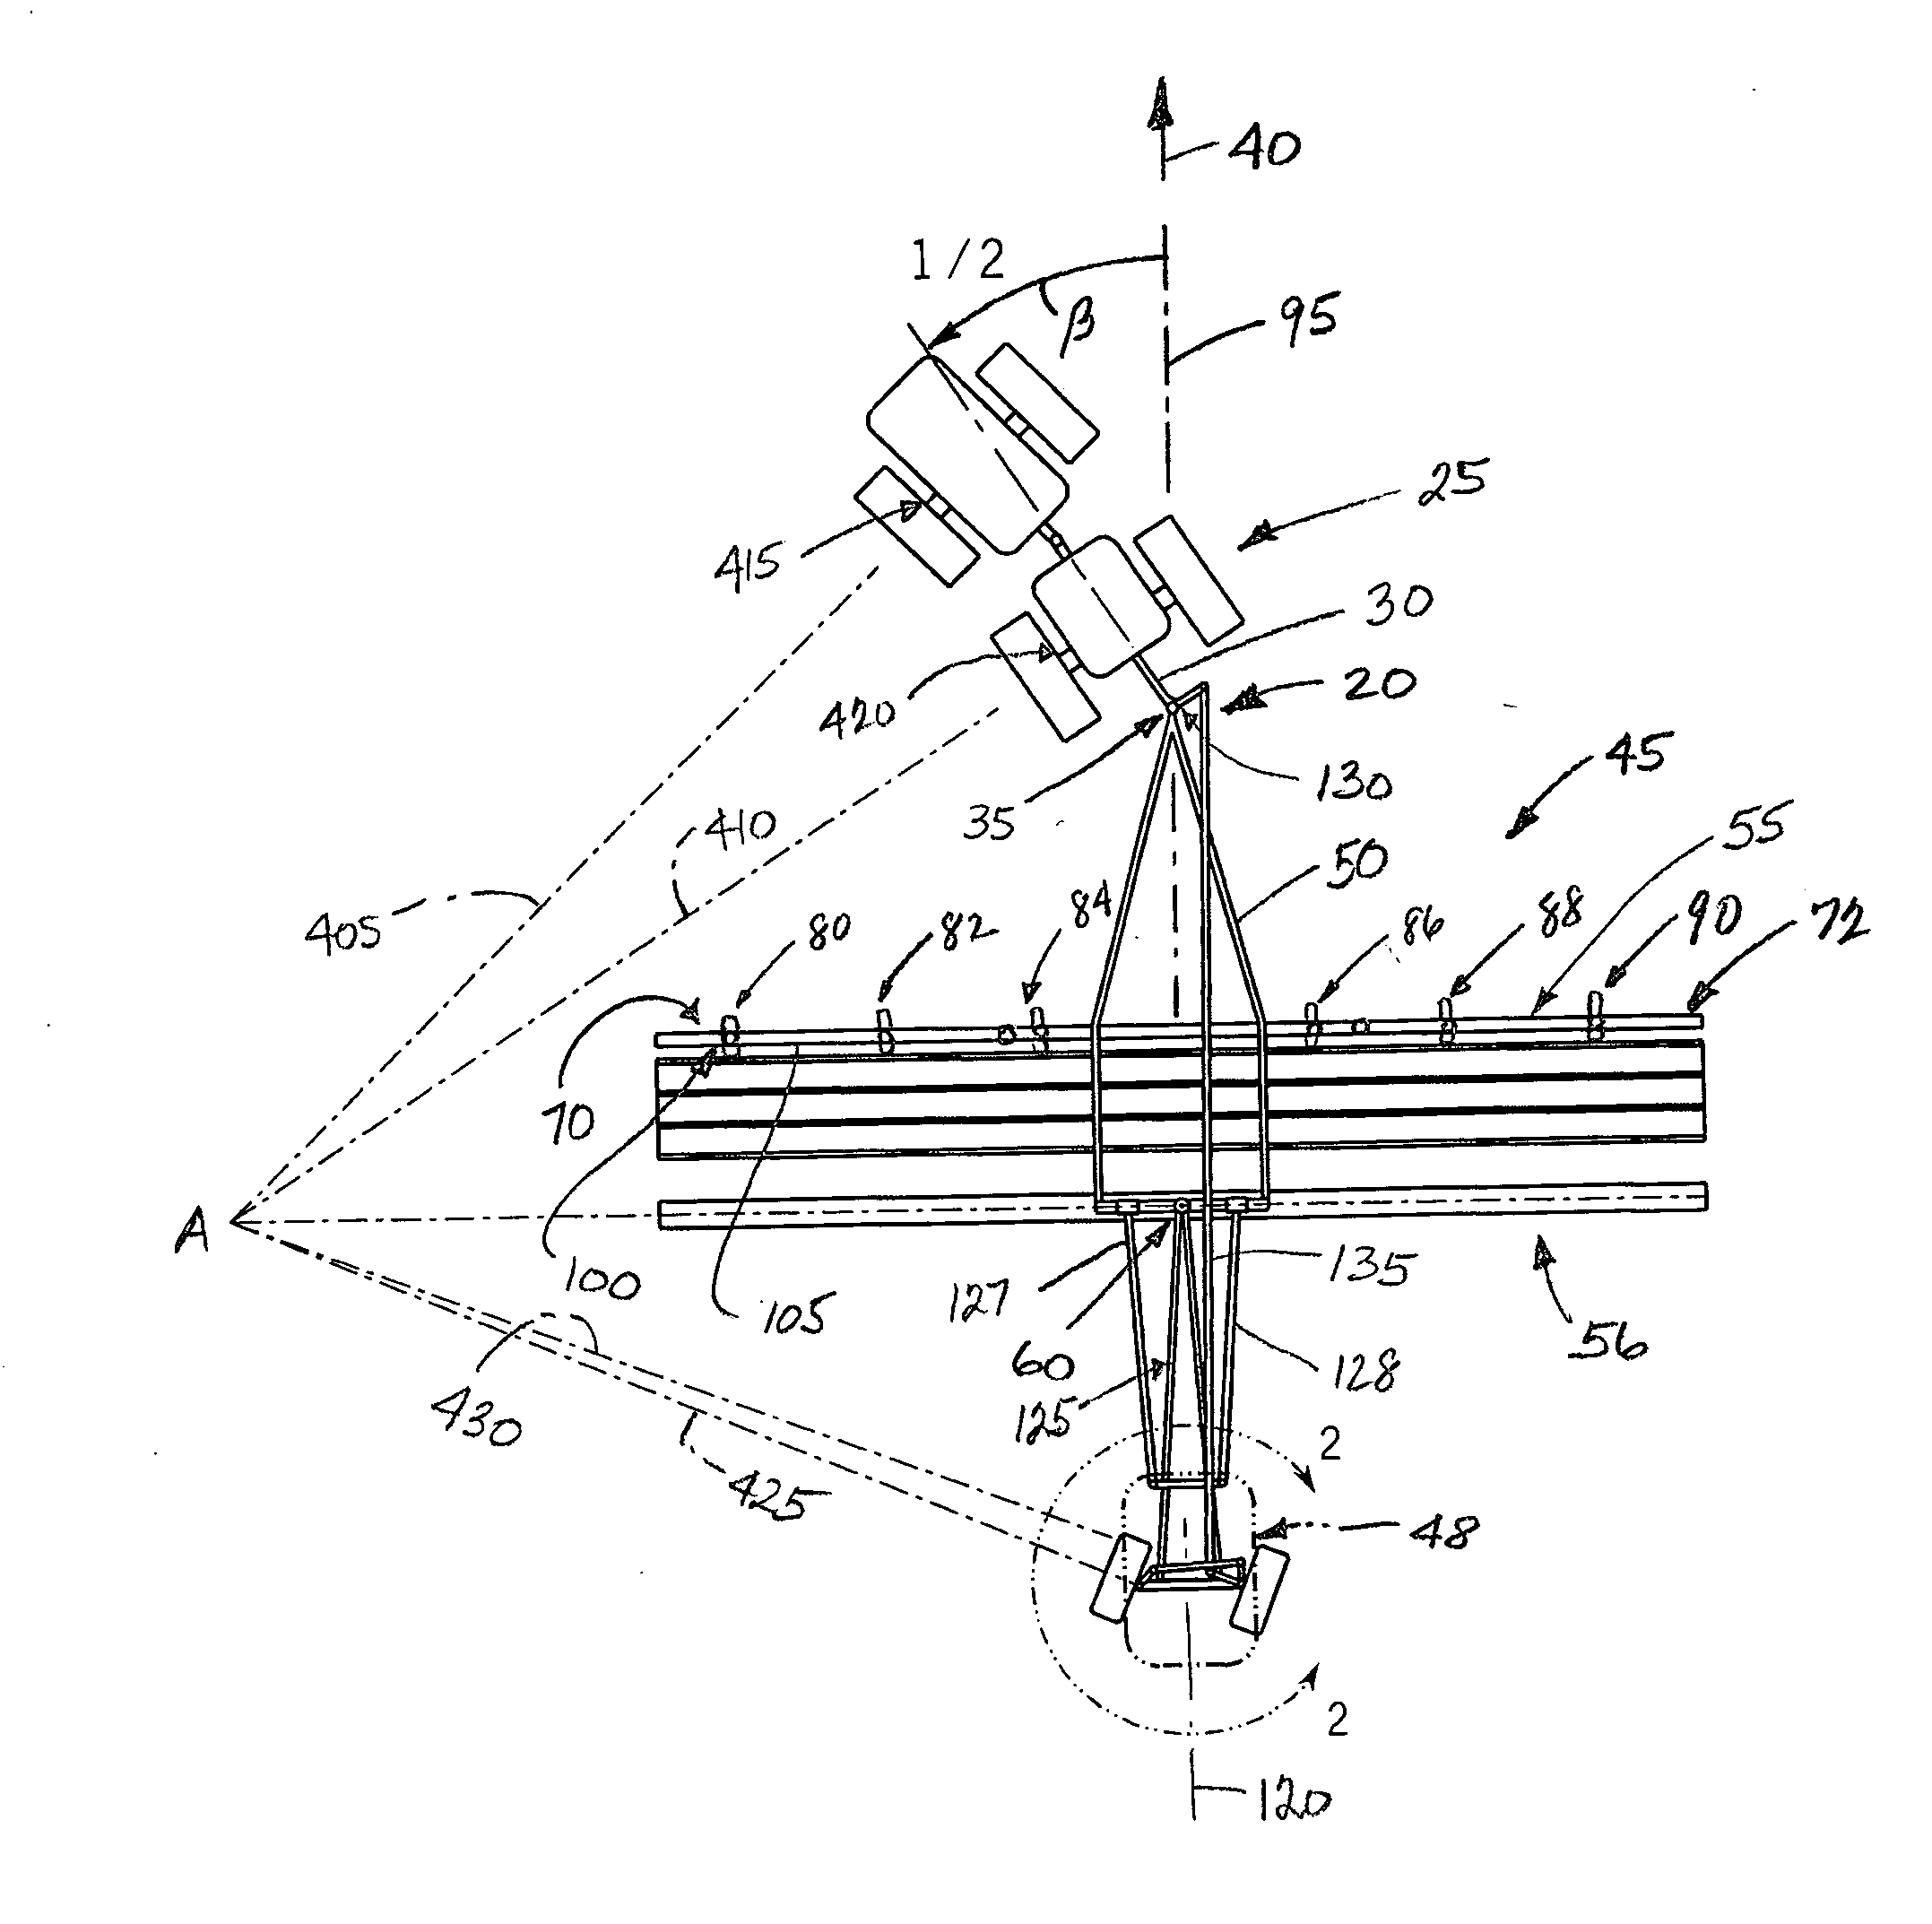 Steering connection assembly between multiple towed implements